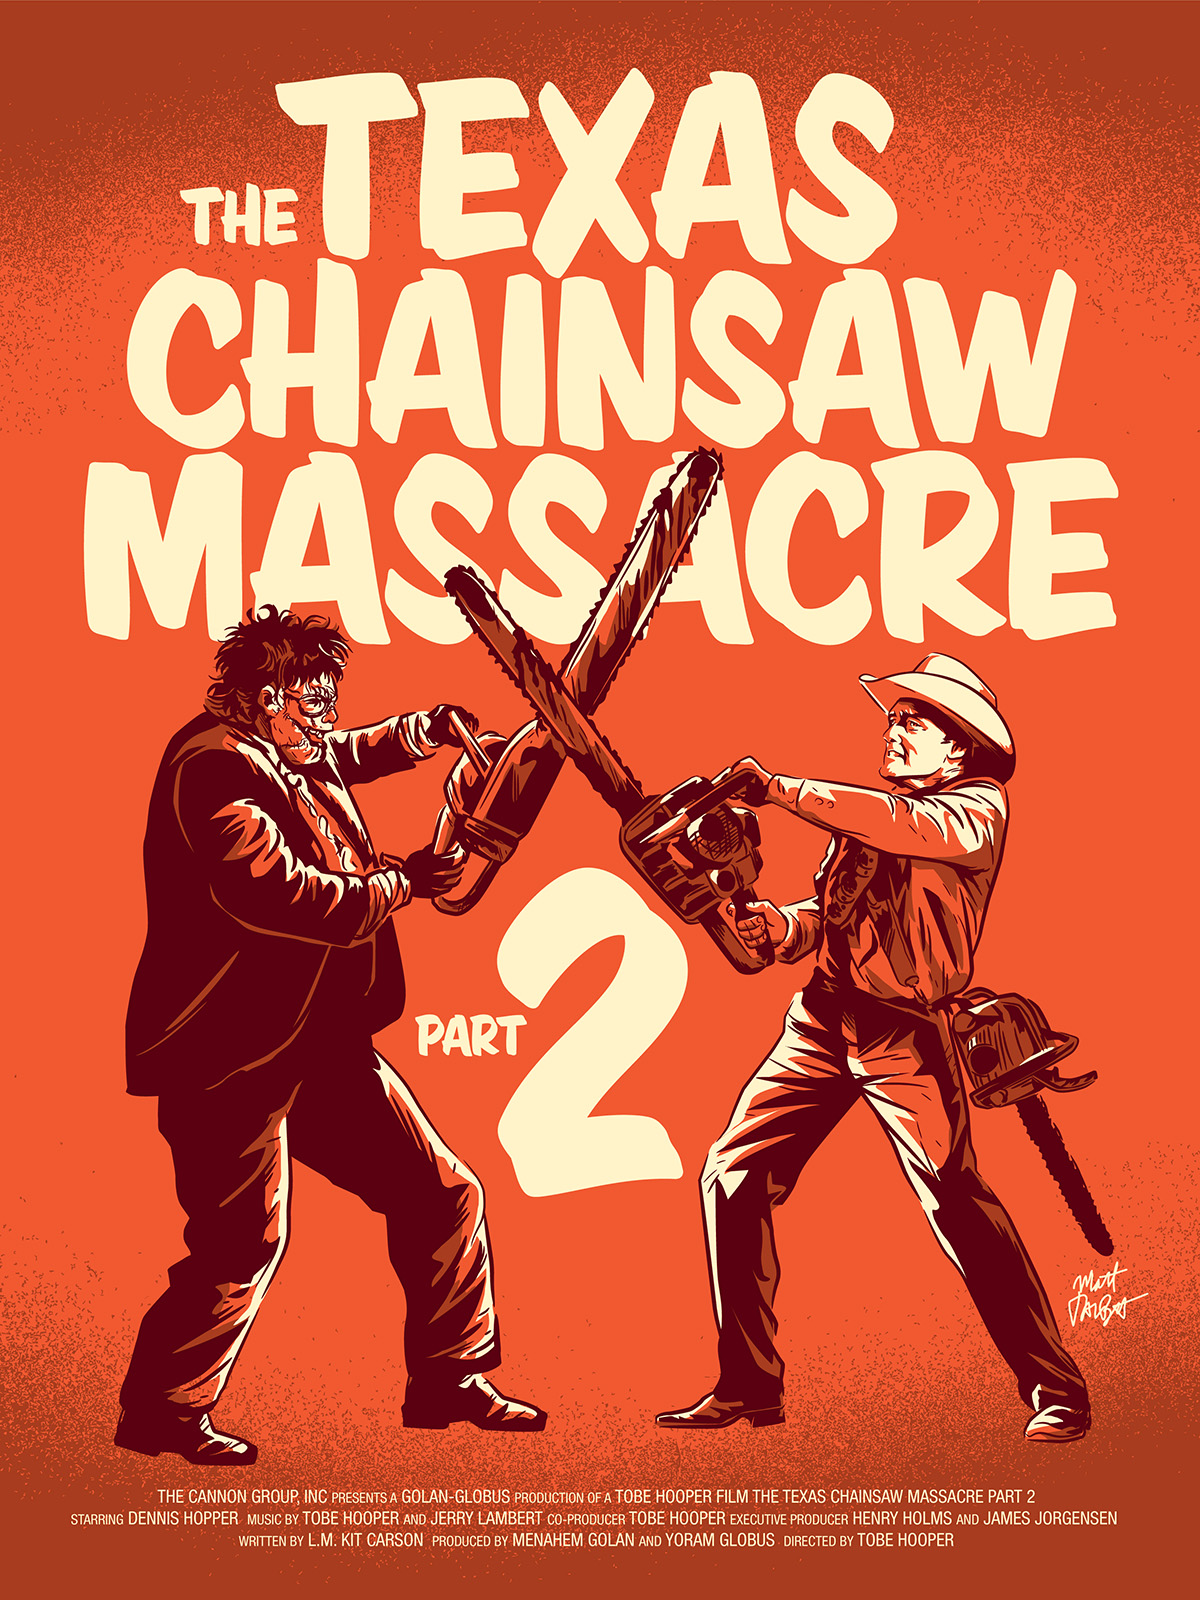 The Texas Chainsaw Massacre Part 2 - PosterSpy